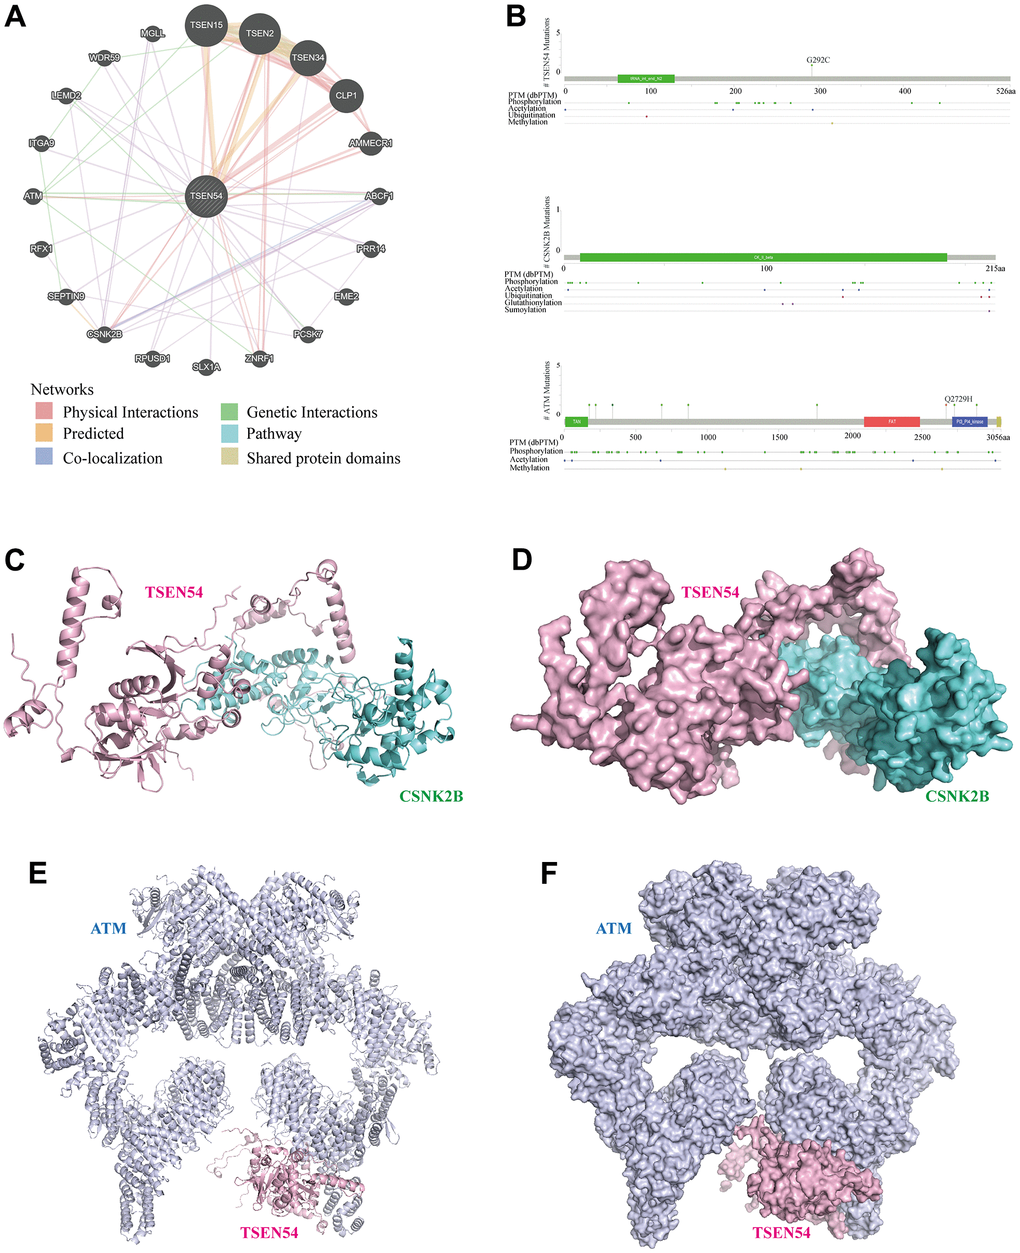 Analysis of the interaction network and docking structures of TSEN54. (A) Interaction network of TSEN54 with other genes (GeneMANIA). The different colored lines represent different linkage information. (B) Protein secondary structures of TSEN54, CSNK2B and ATM. (C–F) Cartoon view and Surface view of the overall conformation of TSEN54 combined with CSNK2B or ATM. TSEN54 is colored in light pink, CSNK2B is colored in aquamarine, and ATM is colored in blue-white.